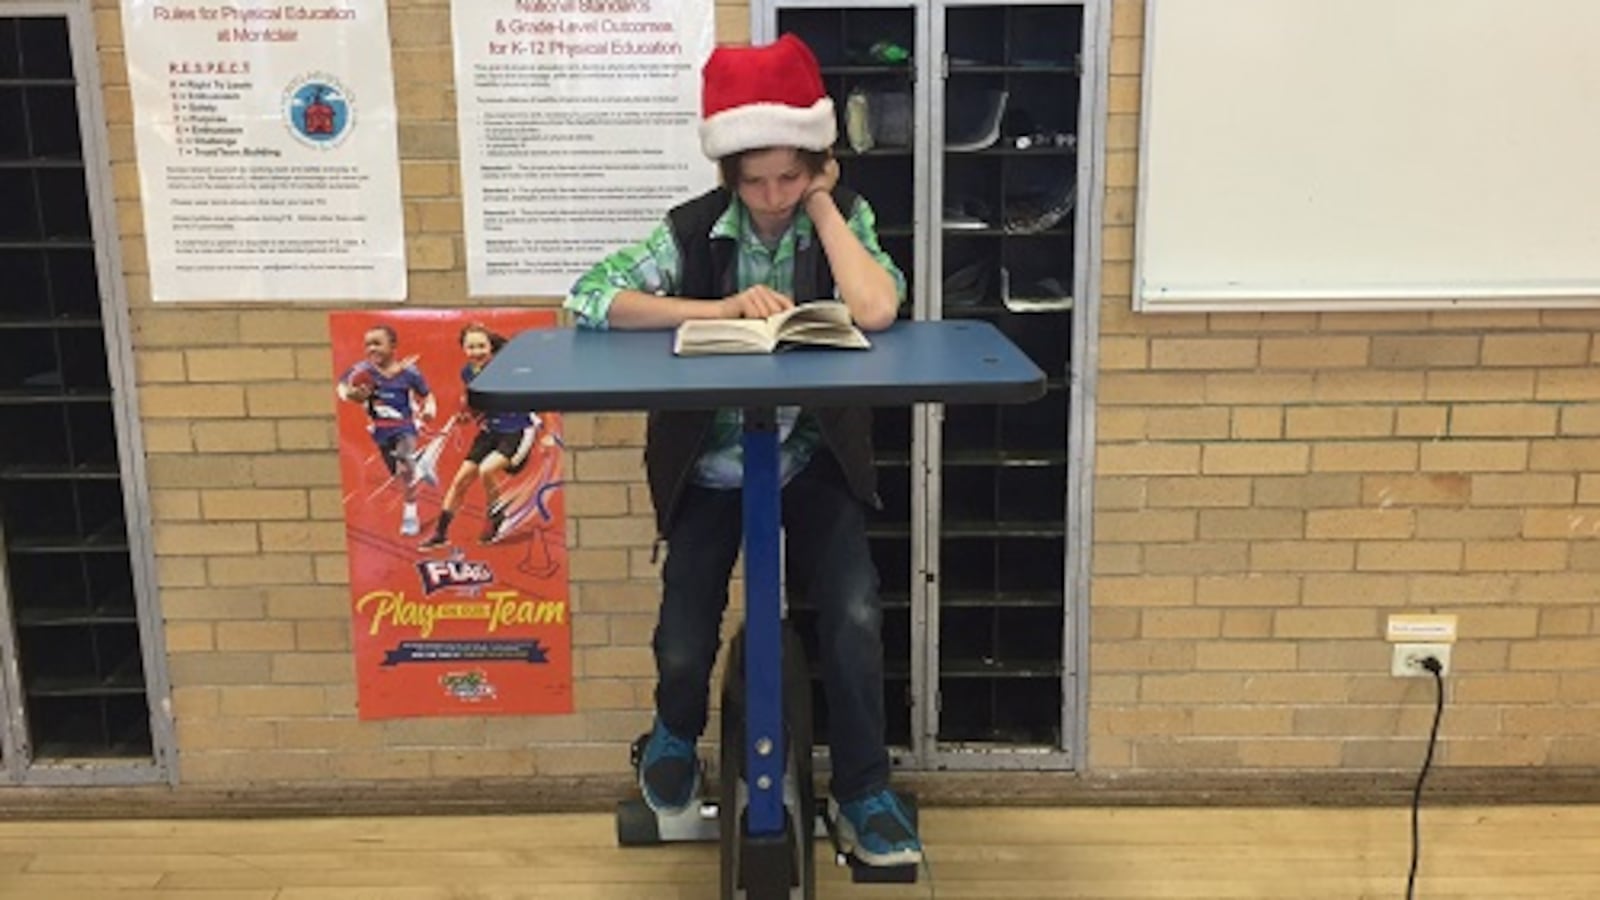 Fifth-grader Miles Dwyer reads at a pedal desk on loan to Montclair from a South Carolina company that makes youth fitness equipment.